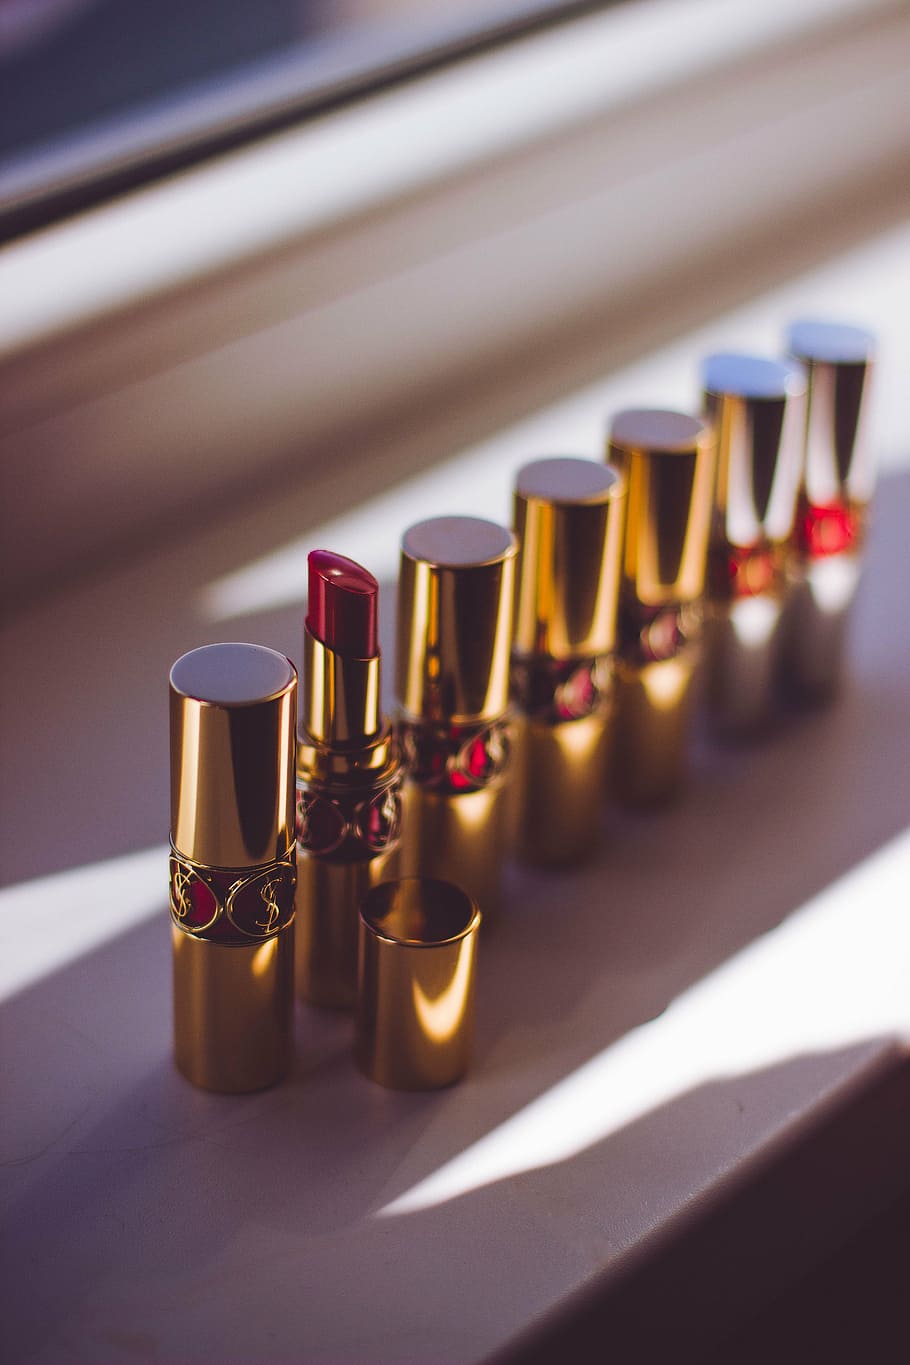 red, lipsticks, standing, window, lipstick, lipstick tubes, makeup, in a row, close-up, indoors